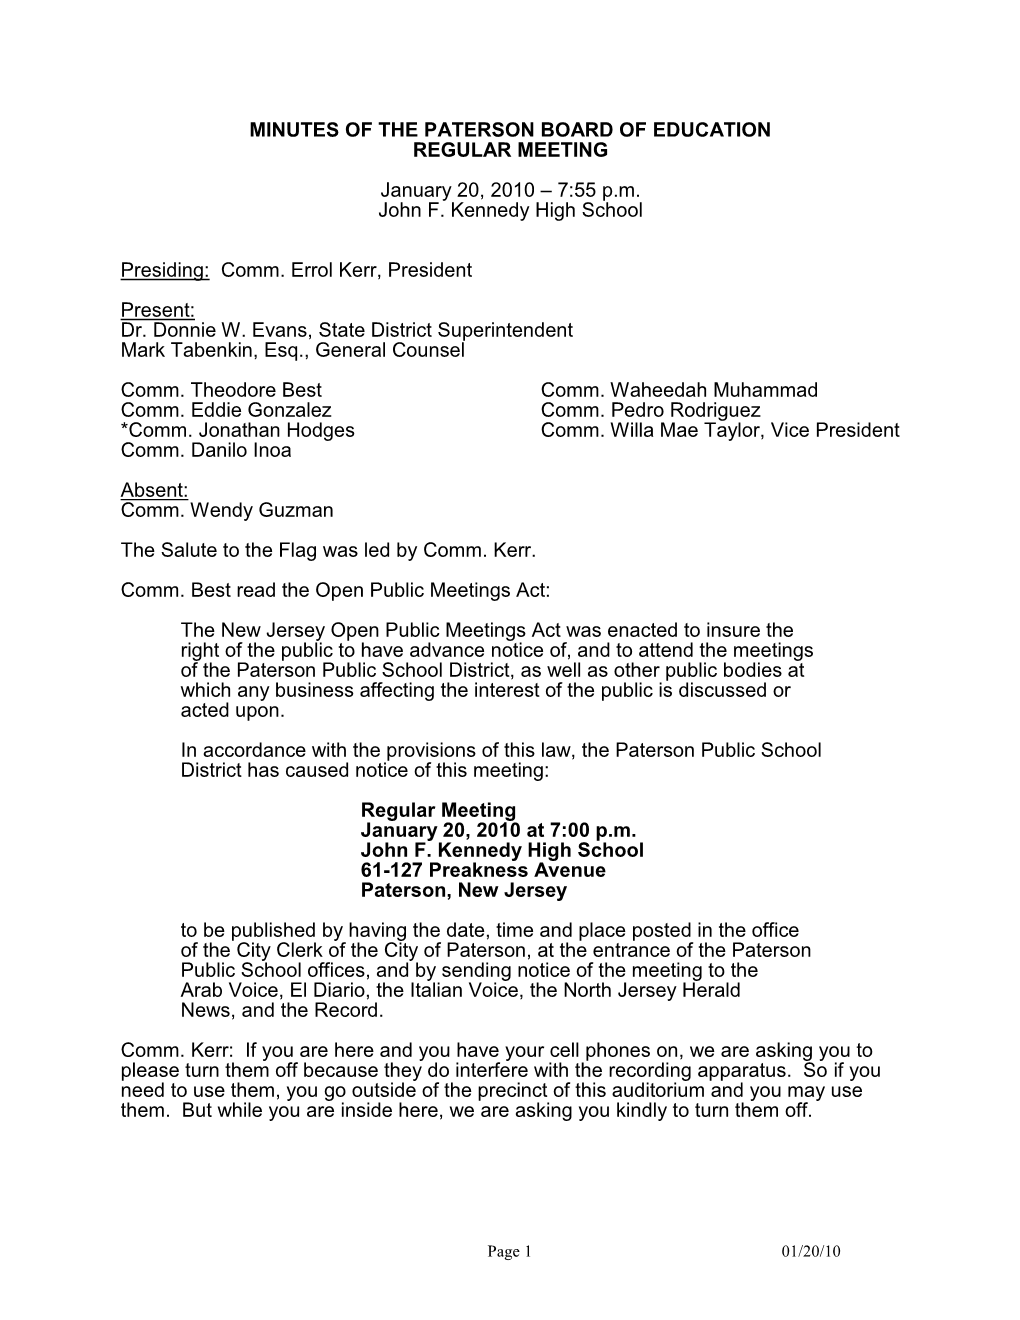 MINUTES of the PATERSON BOARD of EDUCATION REGULAR MEETING January 20, 2010 – 7:55 P.M. John F. Kennedy High School Presiding